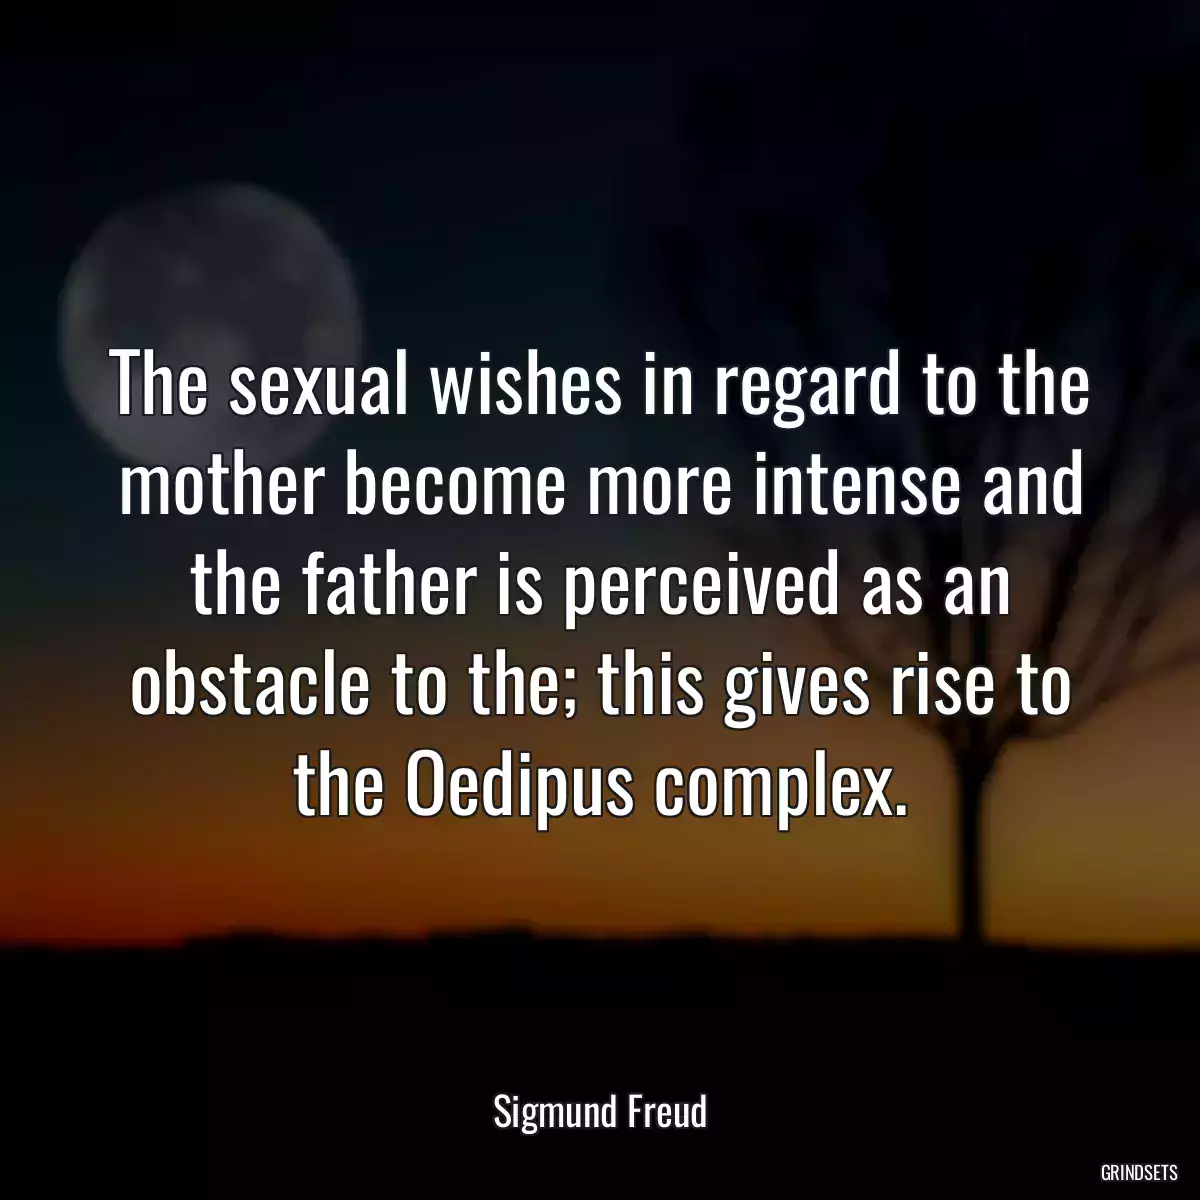 The sexual wishes in regard to the mother become more intense and the father is perceived as an obstacle to the; this gives rise to the Oedipus complex.